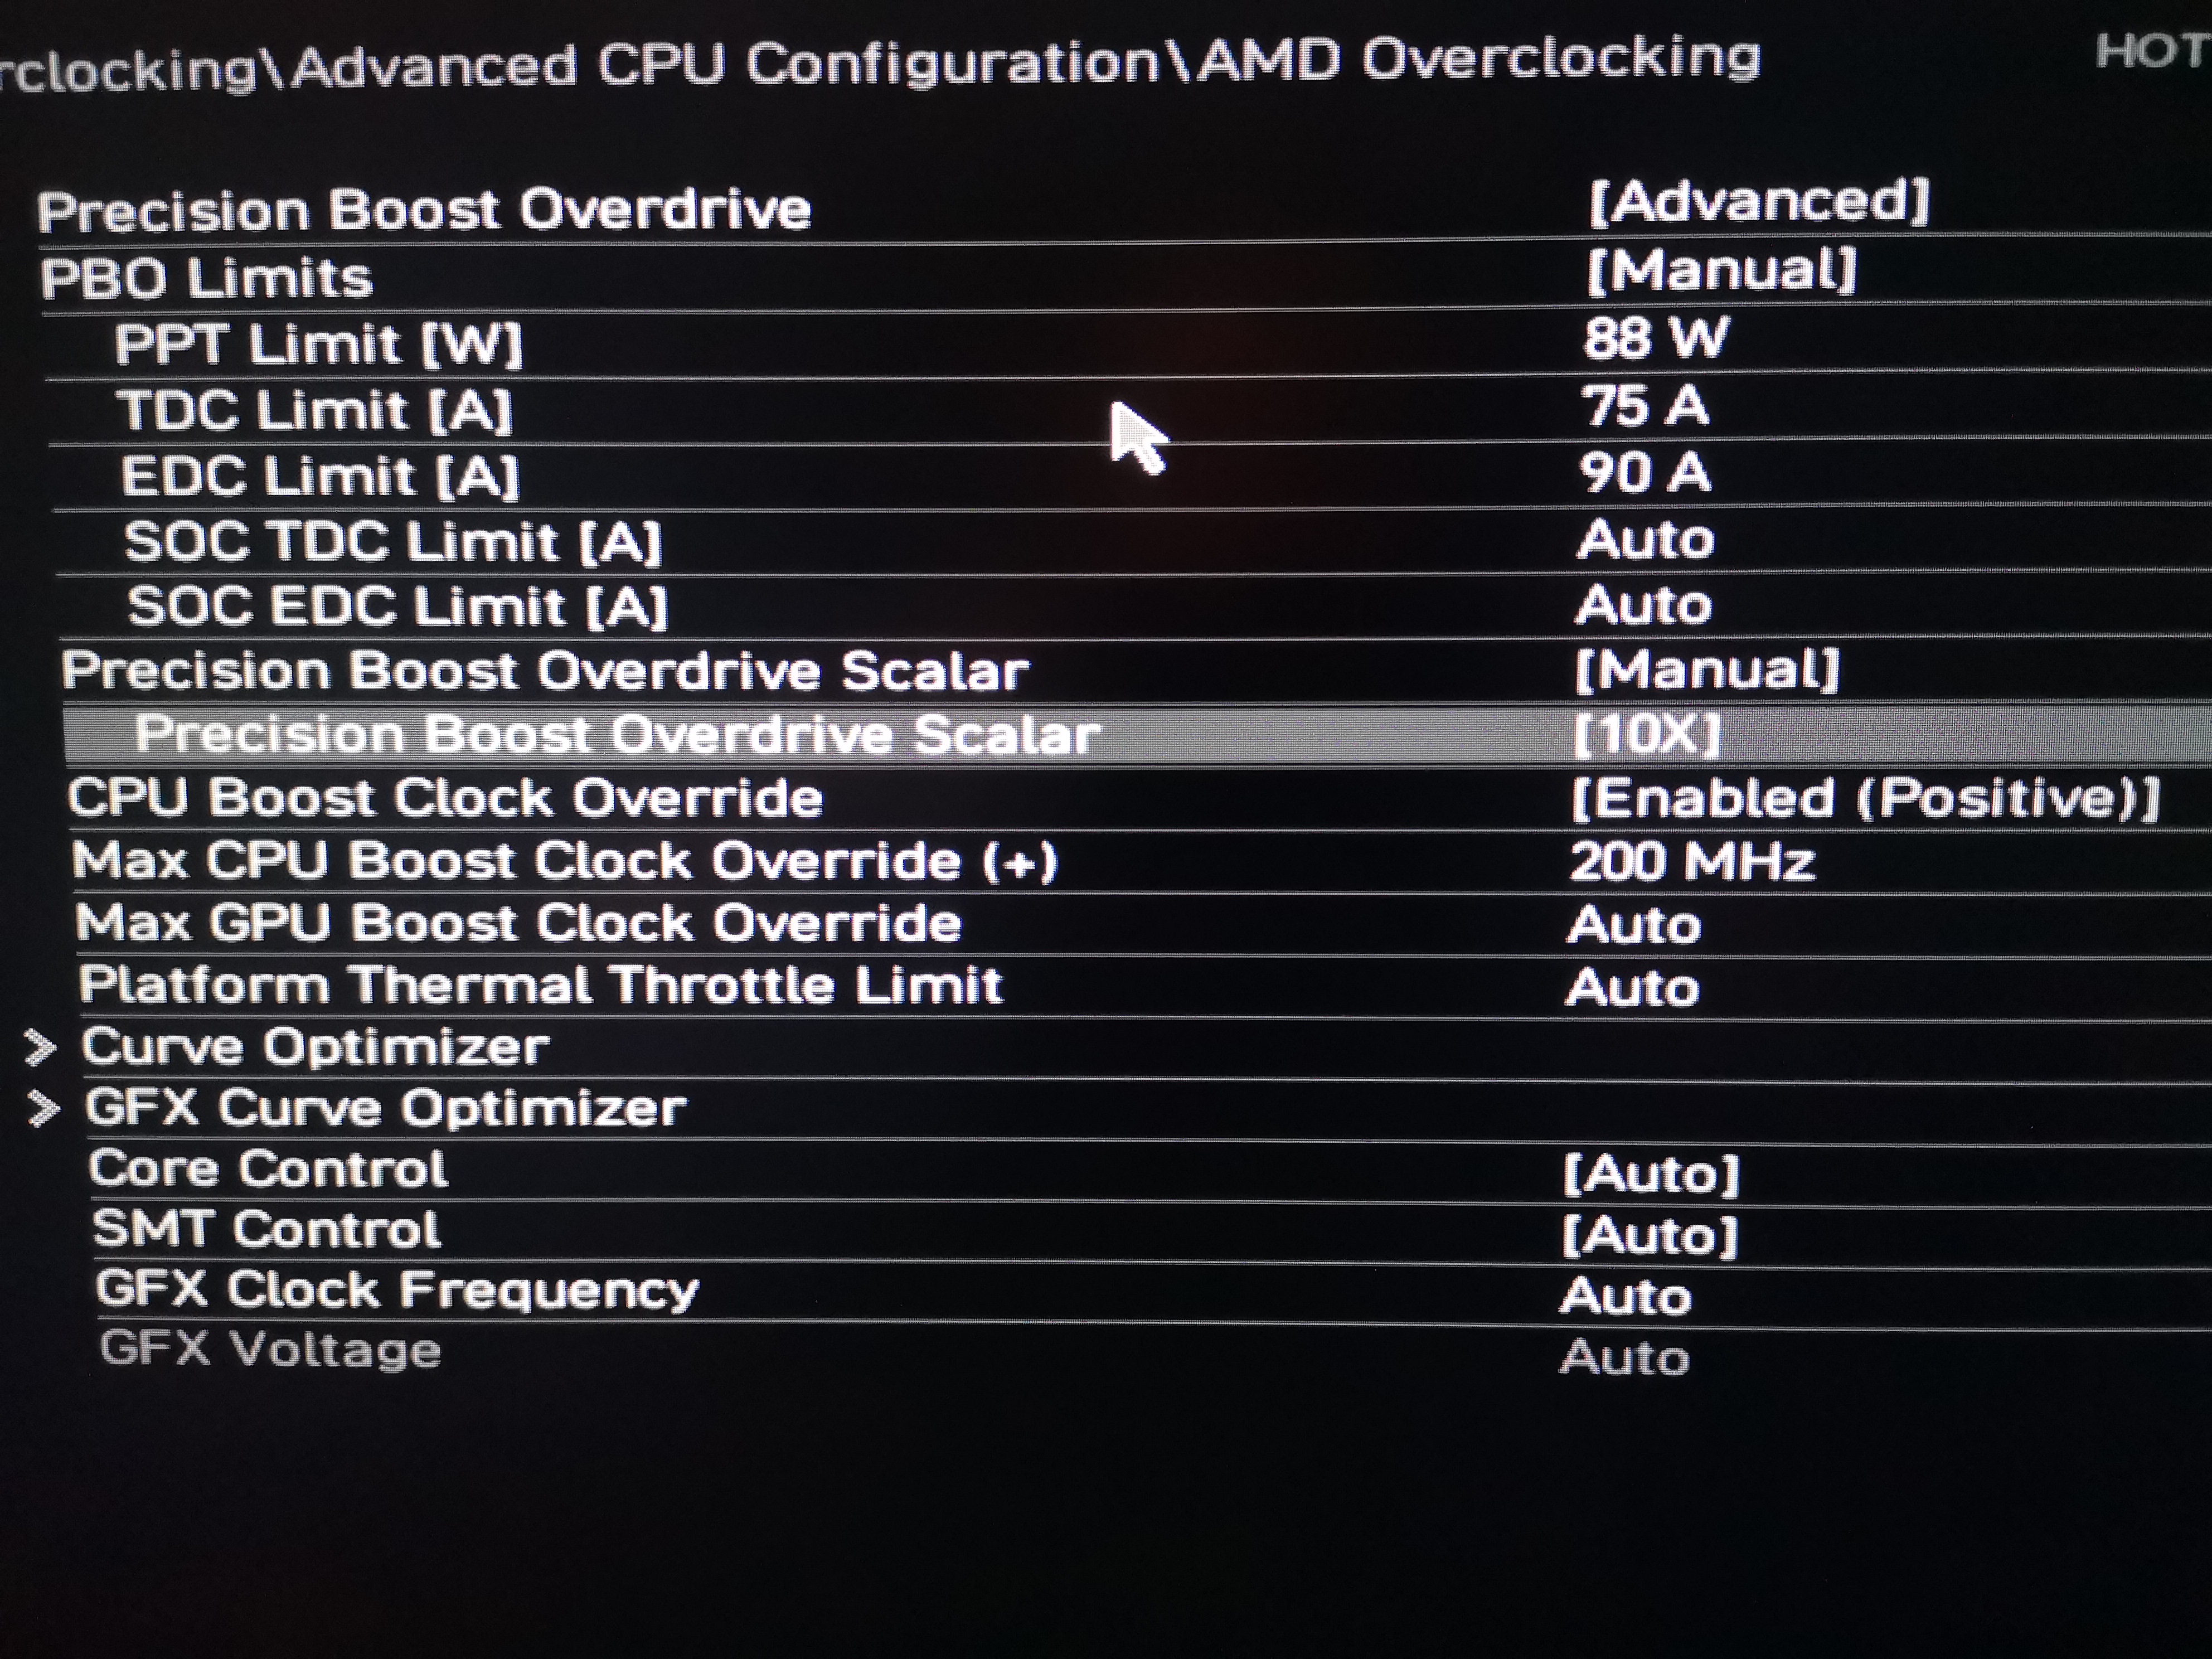 Does this look like a safe OC ? (Ryzen 5500 OC @ 4400 MHz, PBO +150 in  bios, running OCCT) : r/overclocking